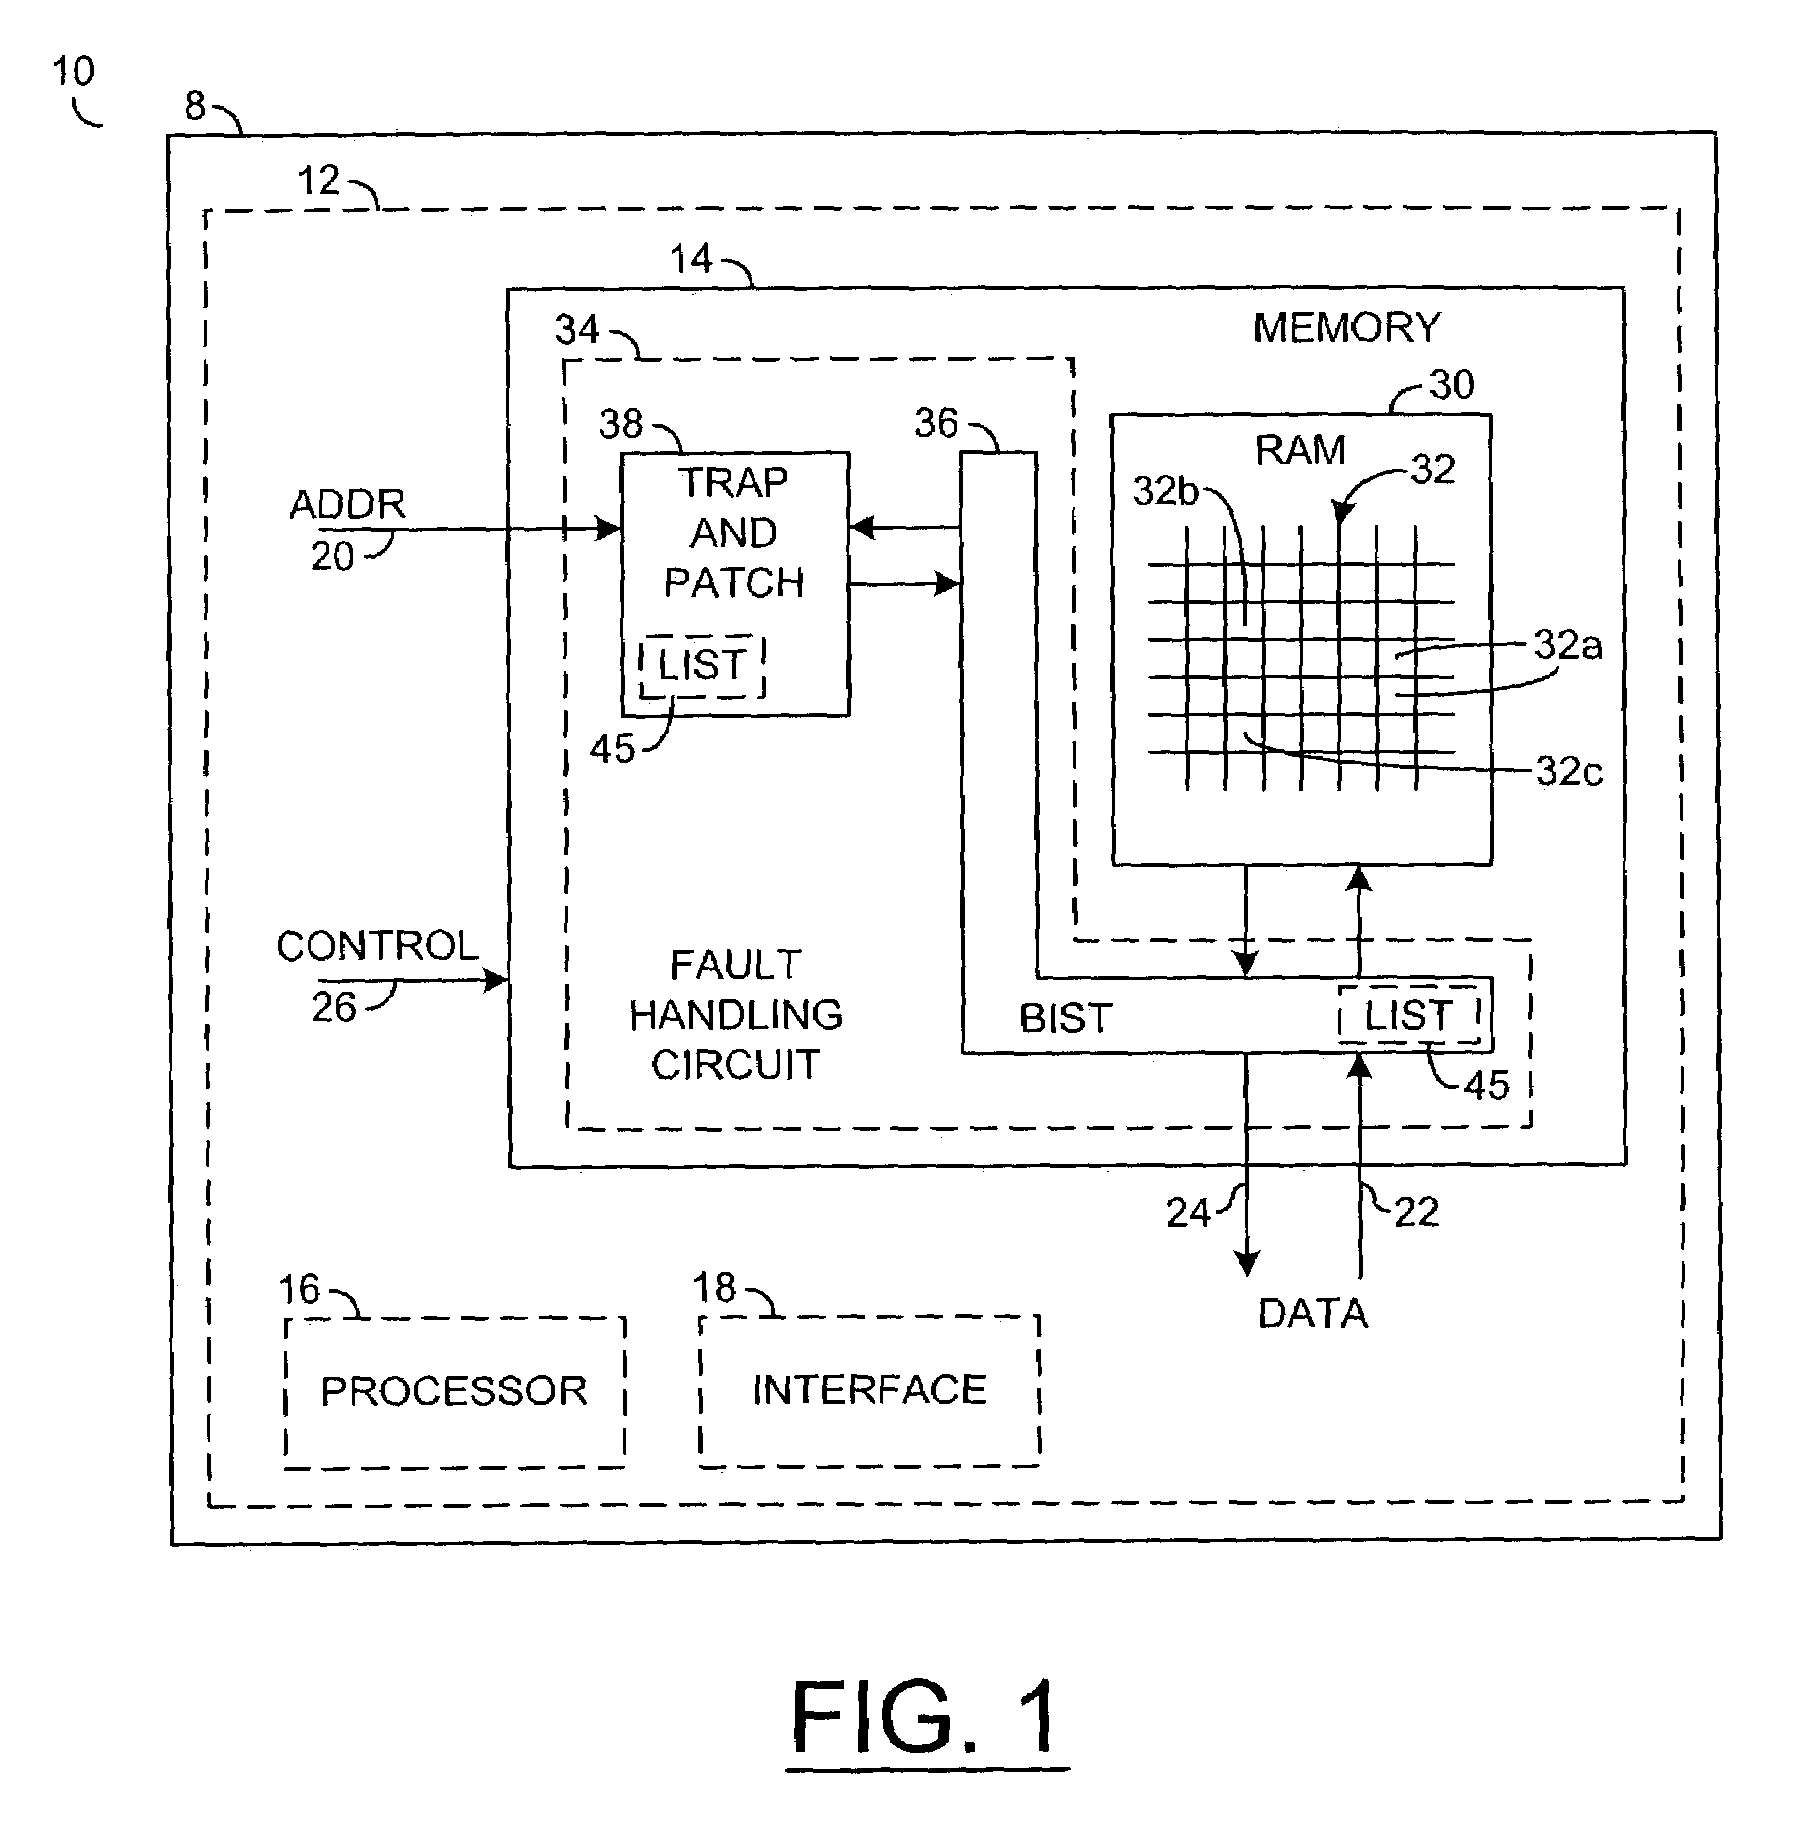 Memory implementation for handling integrated circuit fabrication faults